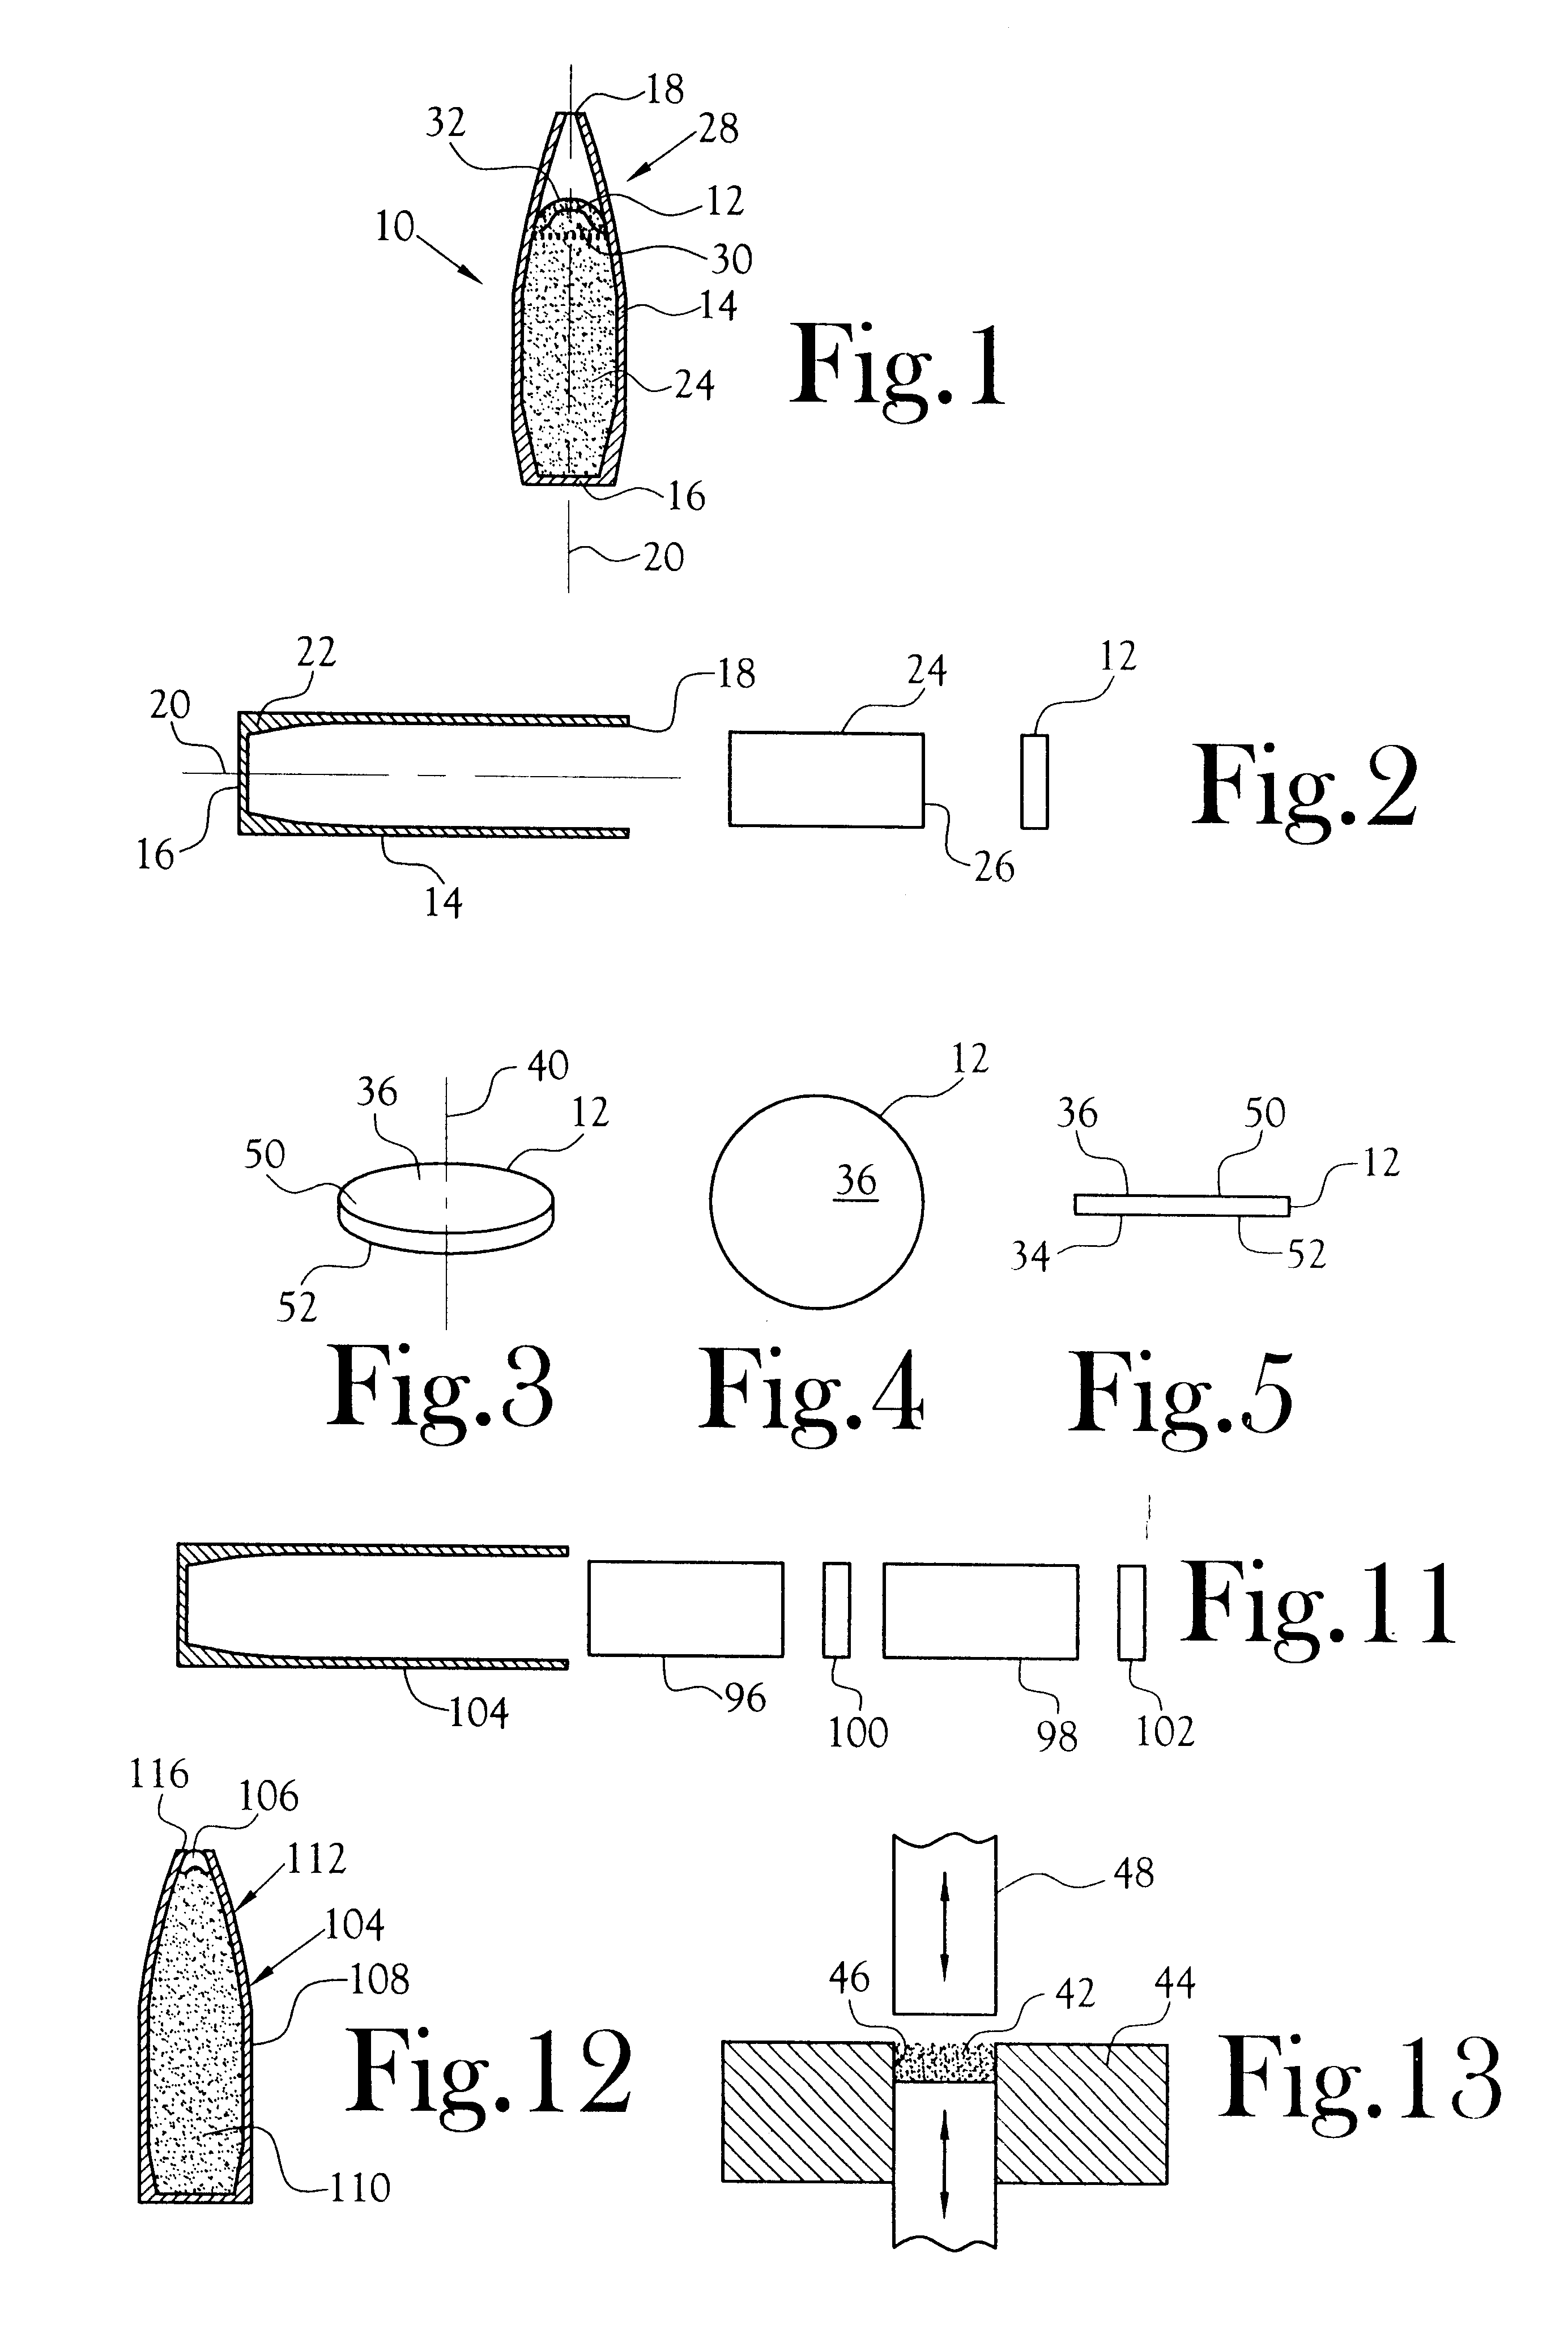 Powder-based disc for gun ammunition having a projectile which includes a frangible powder-based core disposed within a metallic jacket